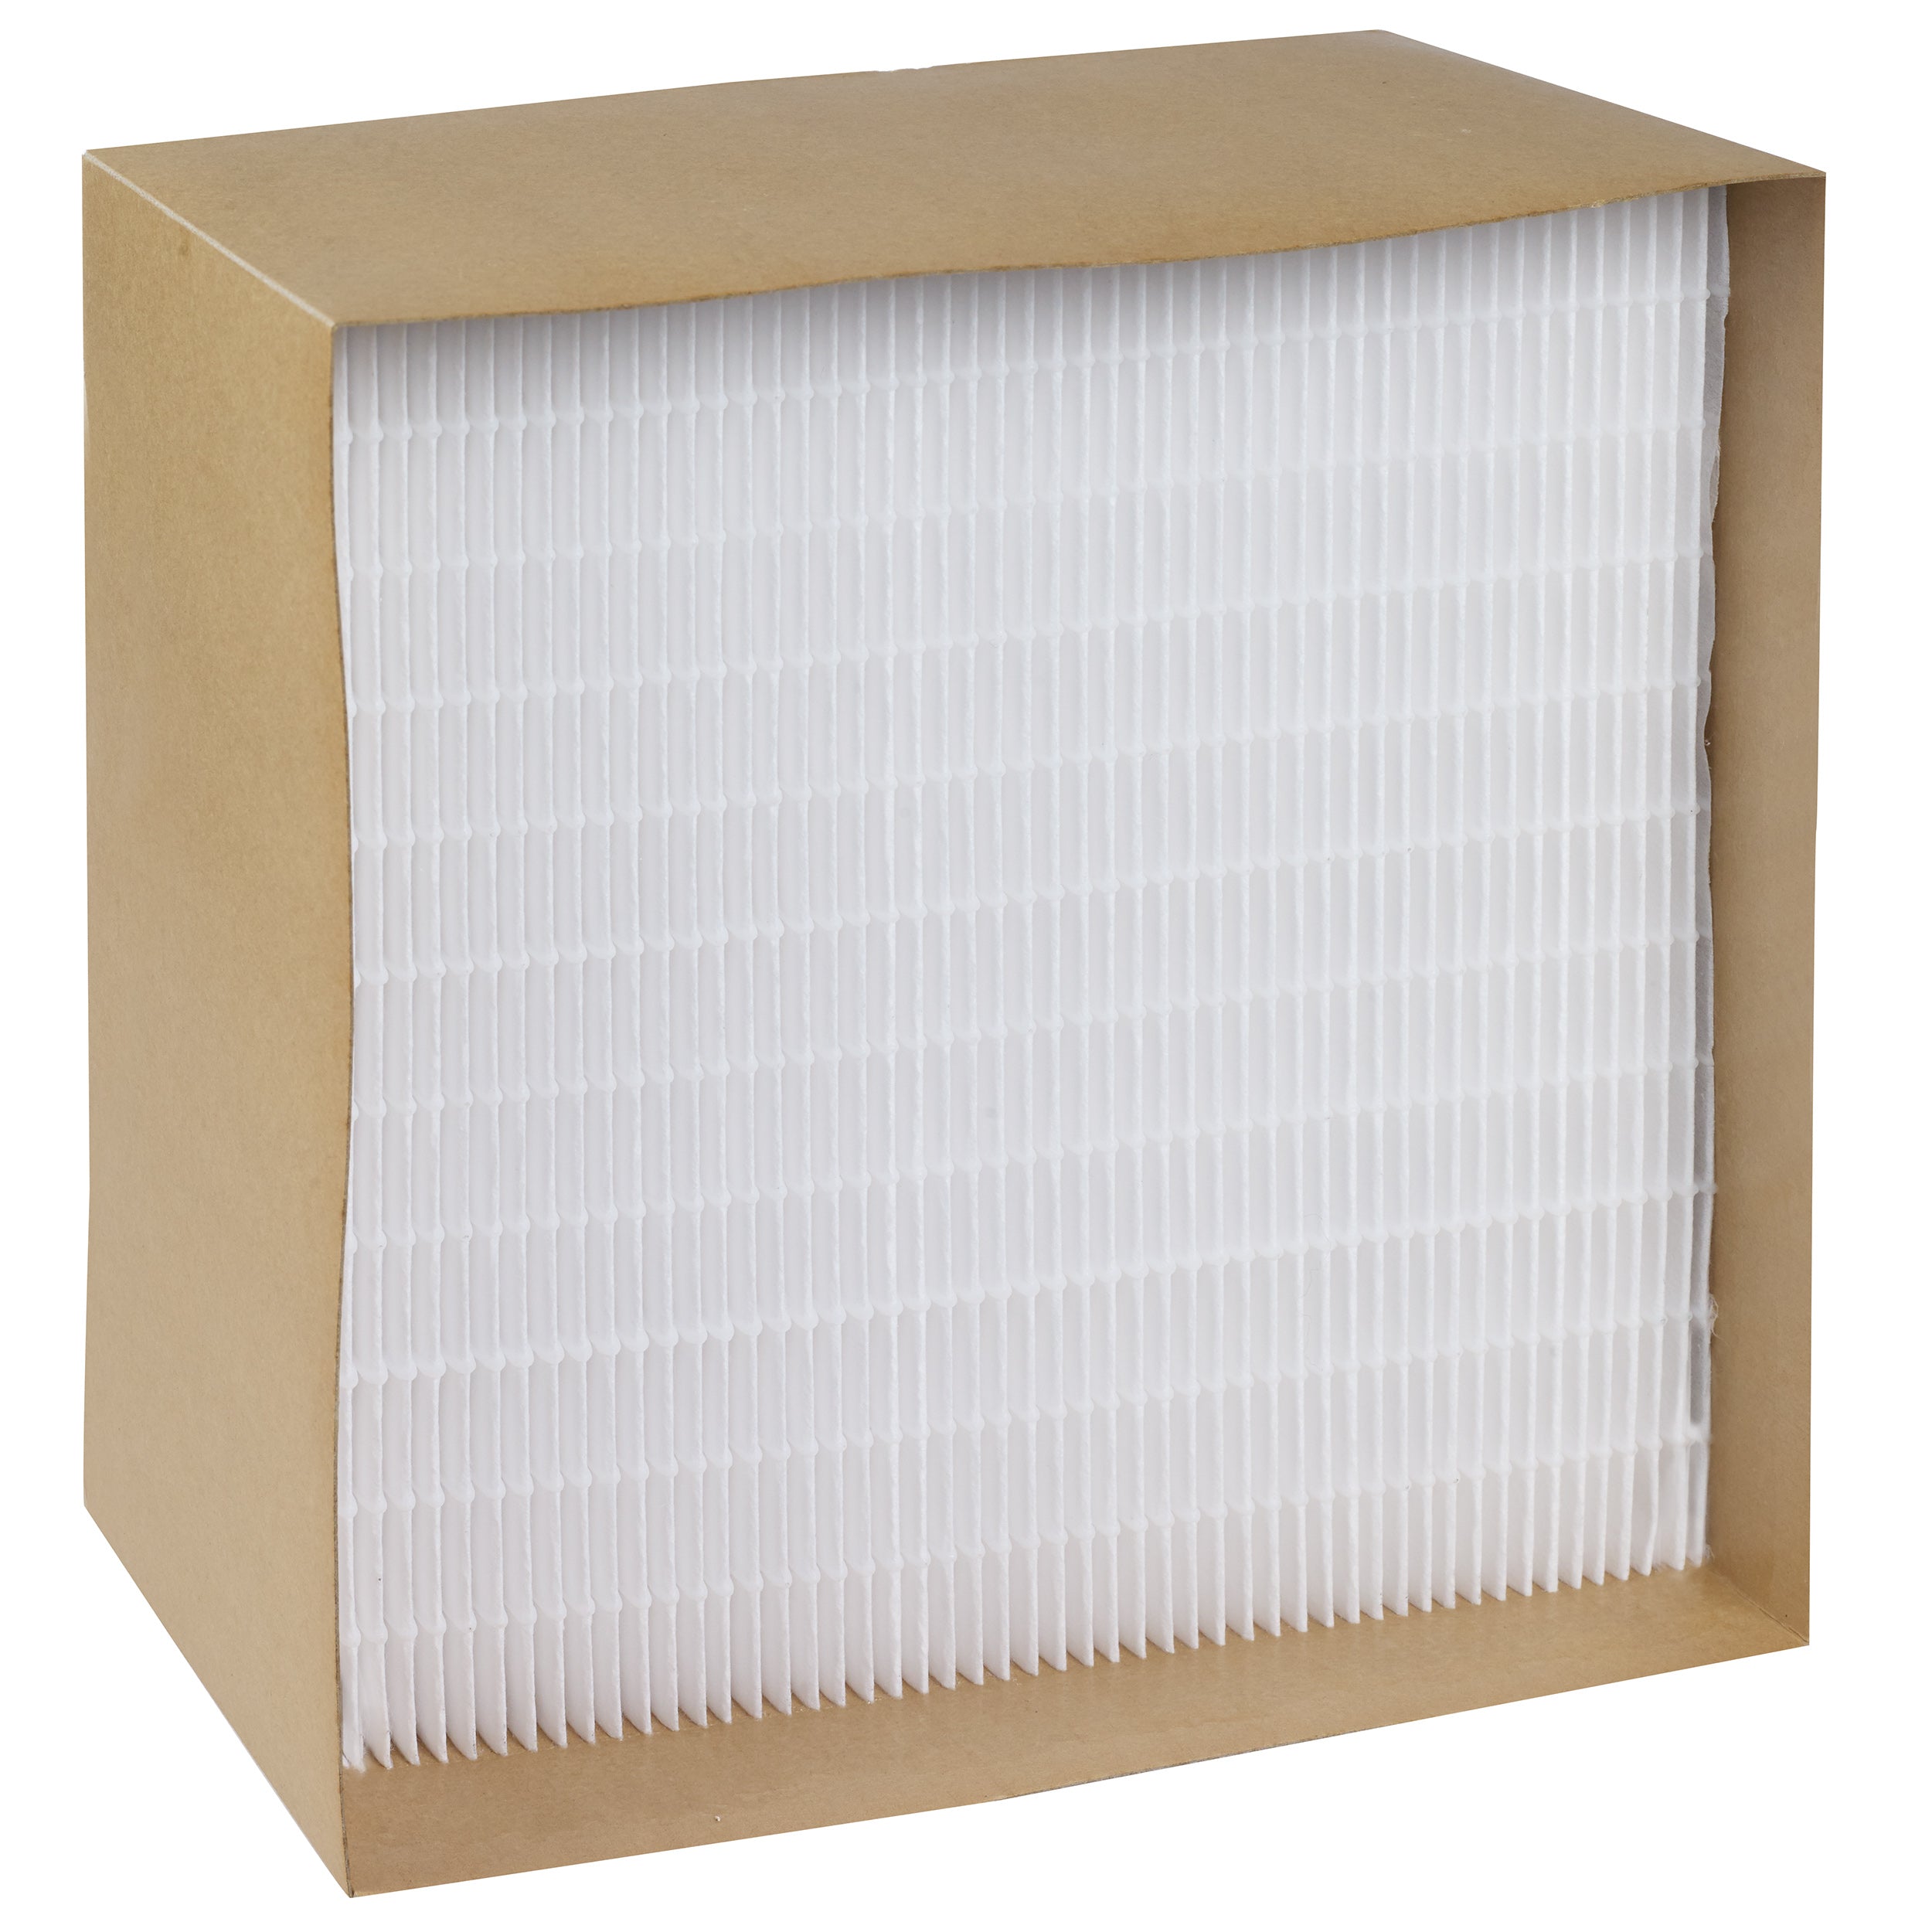 SAVE $$ on your next SMARTVENT Filter only $60